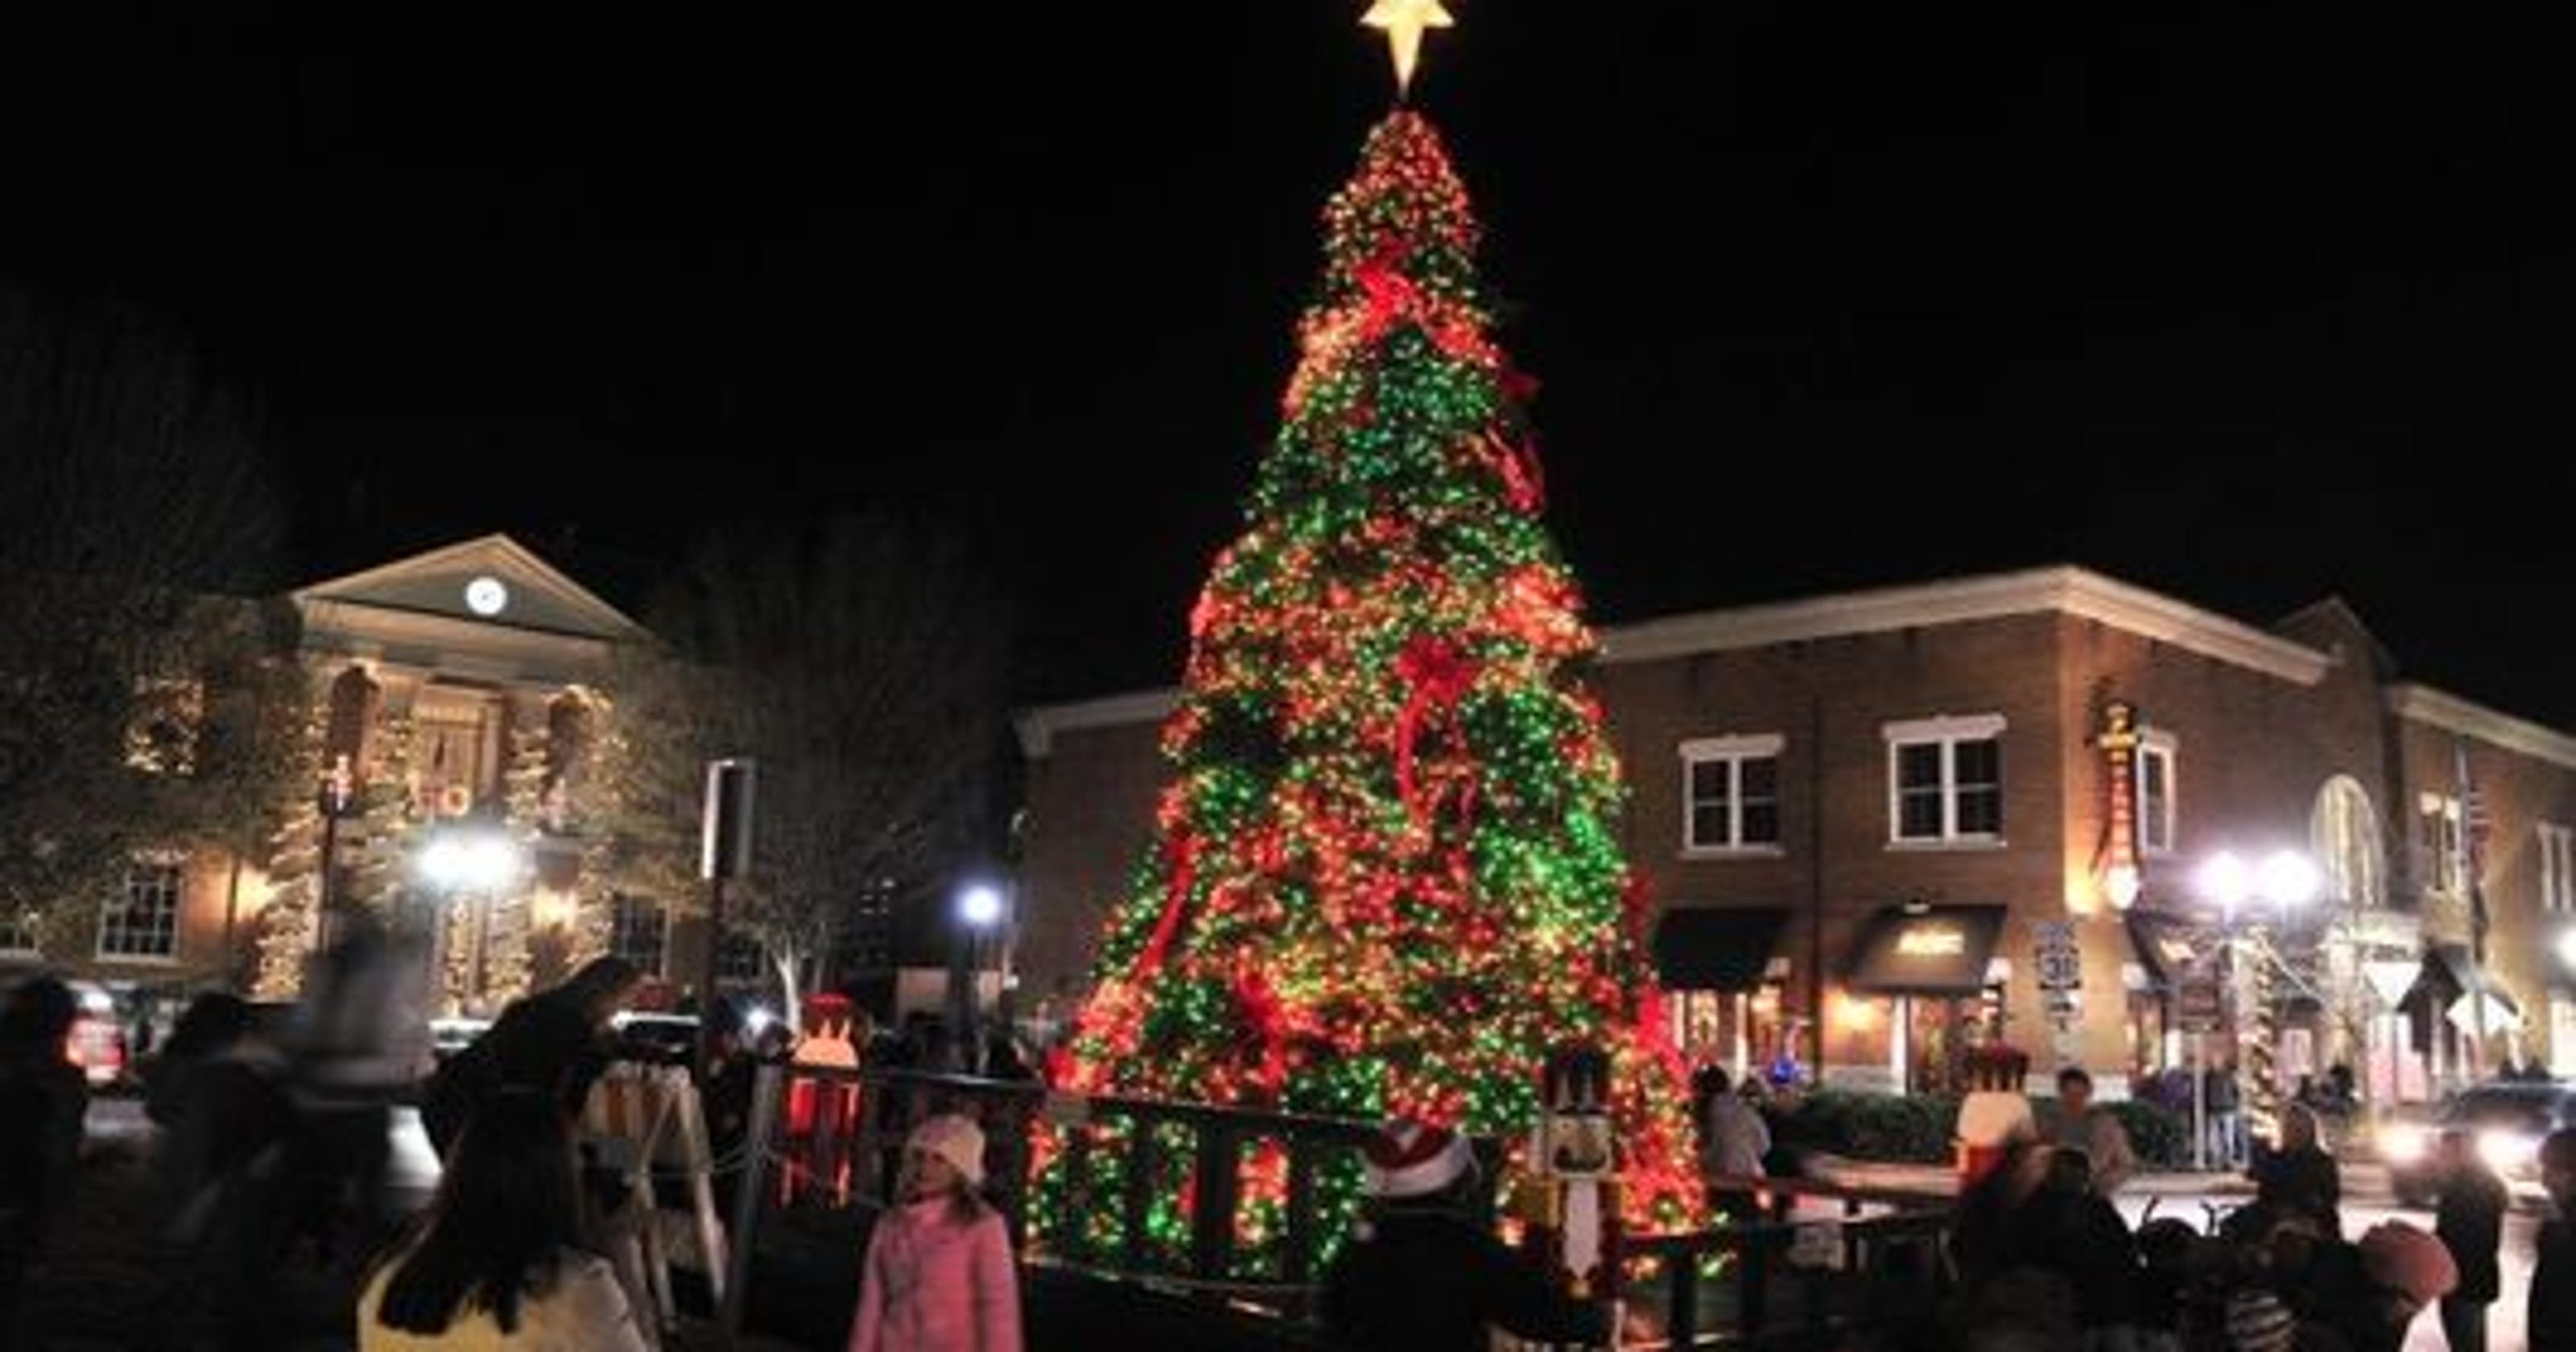 Franklin tree lighting a mustvisit for families